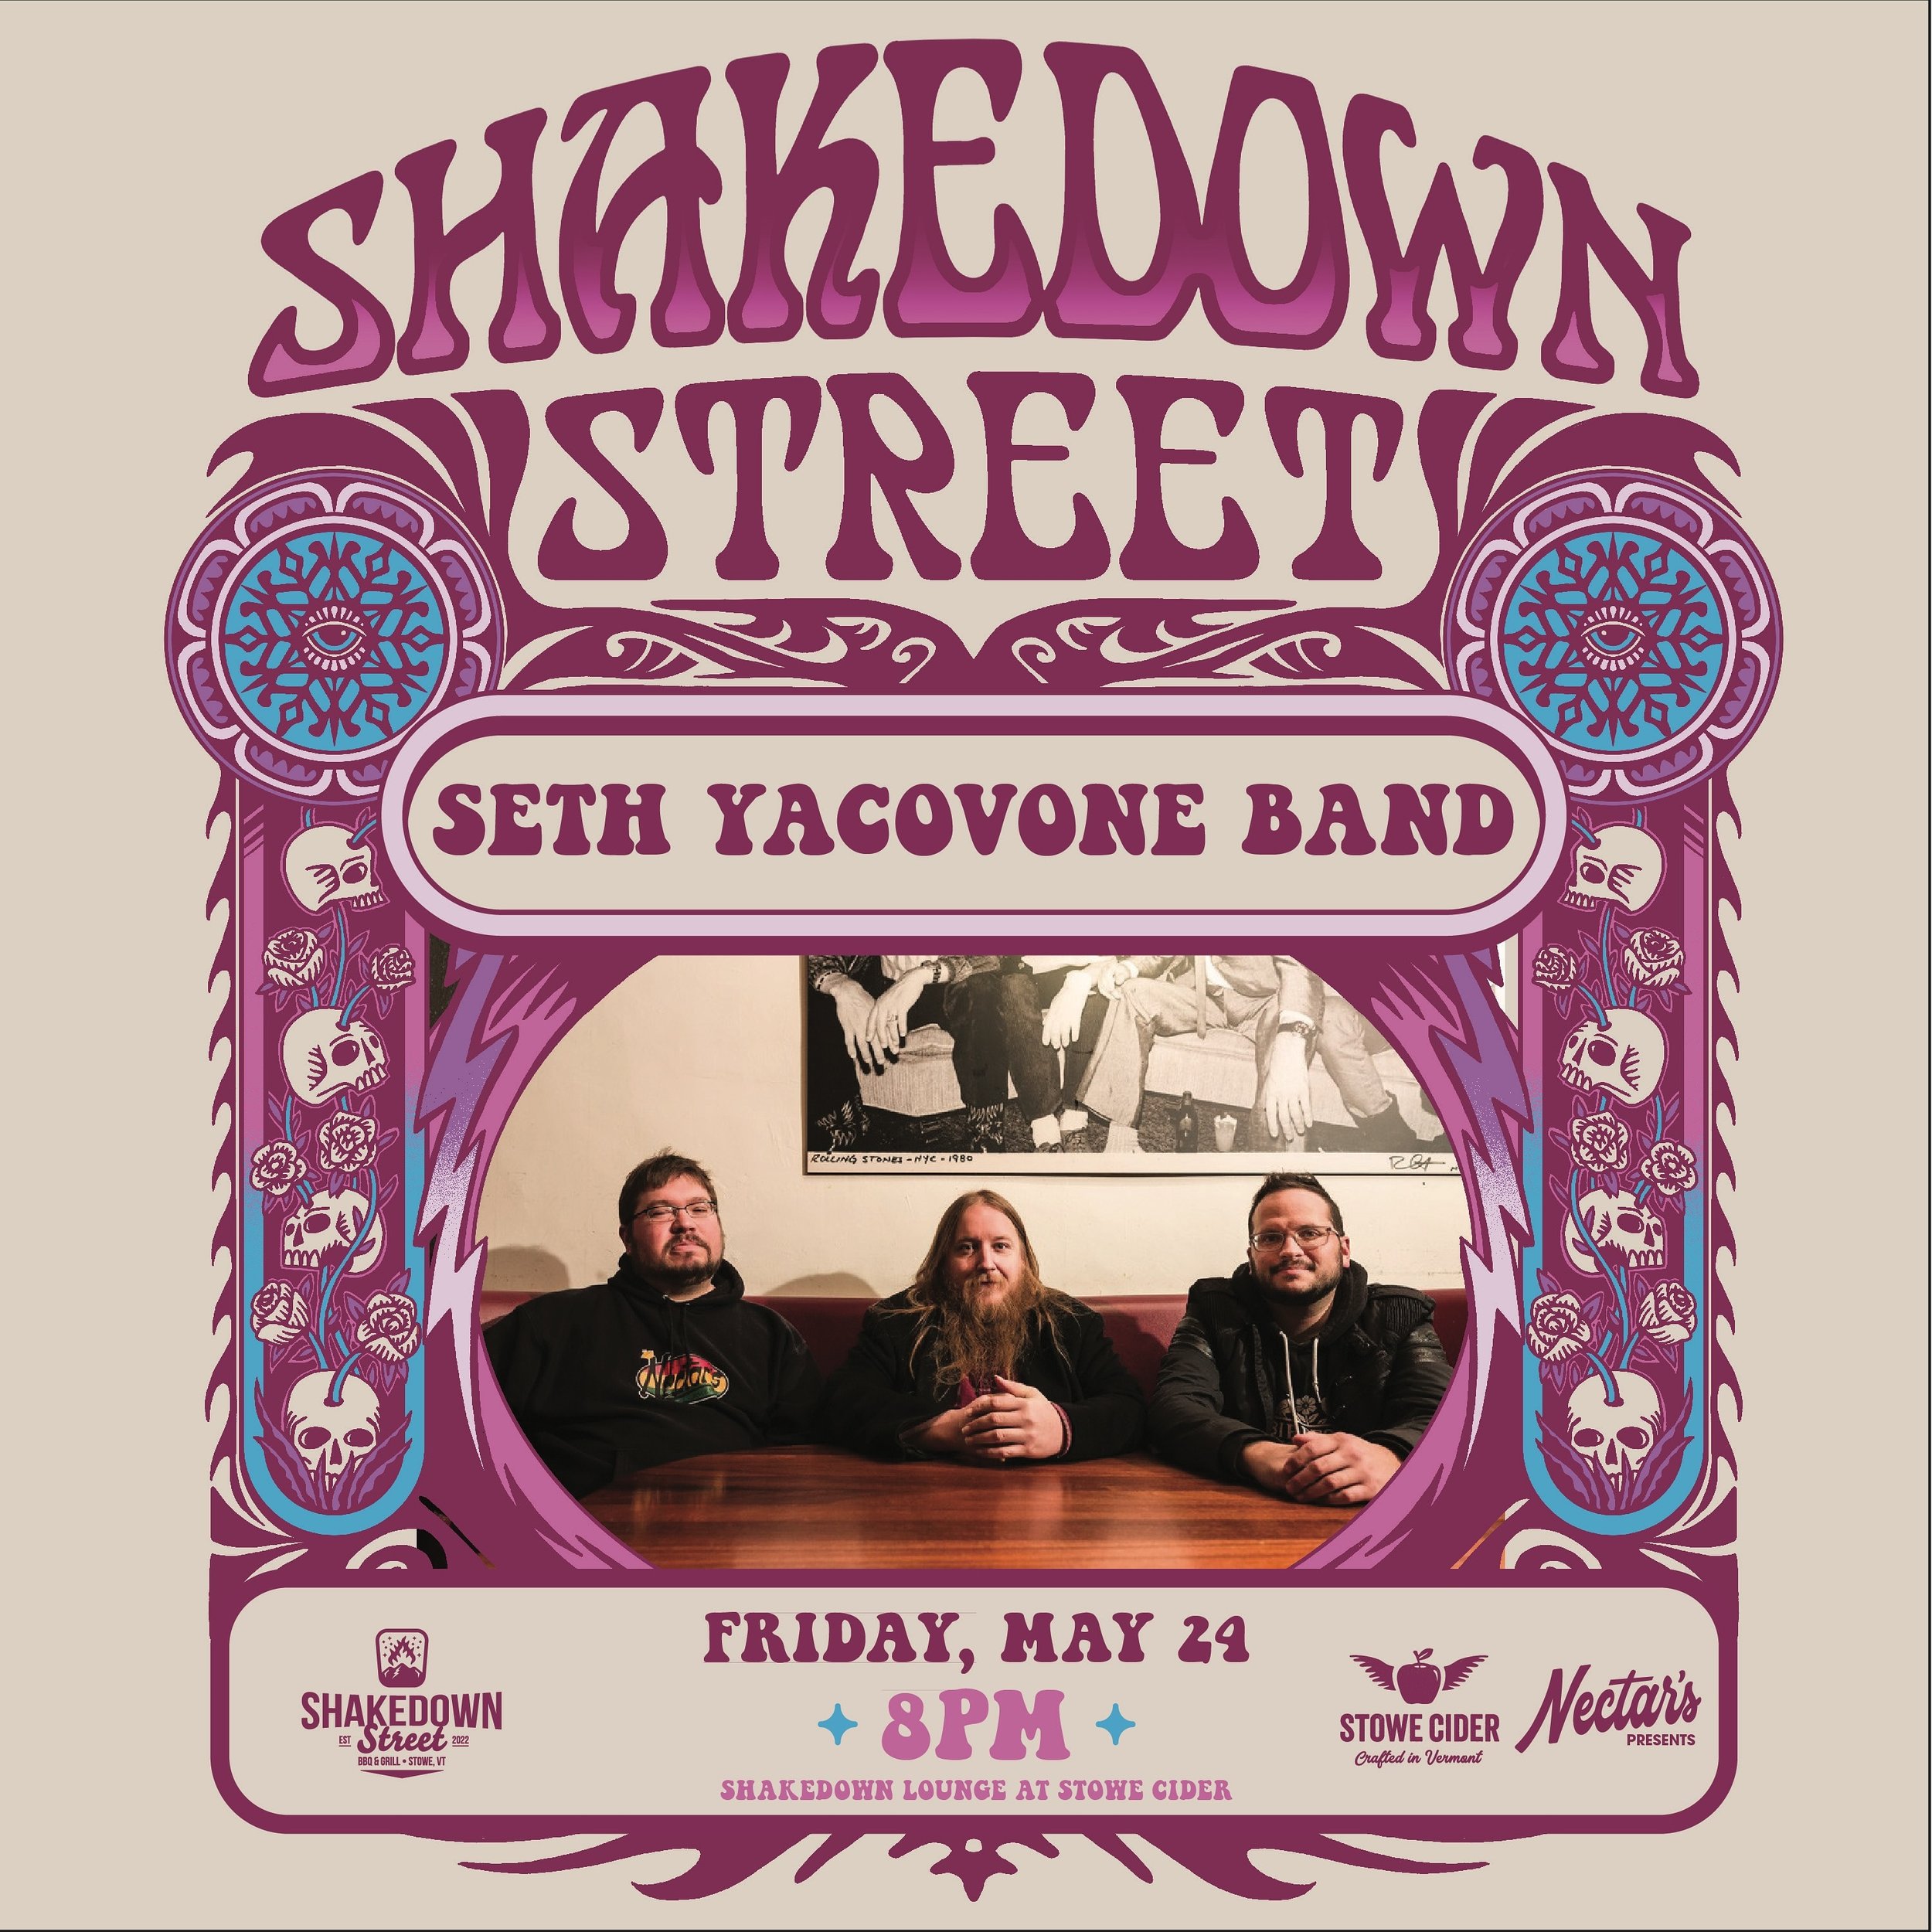 Seth Yacovone Band will be back at the Shakedown Lounge at Stowe Cider on Friday, May 24th at 8pm! 🎶

We know you know, but Seth Yacovone Band has been a fixture of the Vermont music scene since 1995.

The band has released 8 albums, toured America 